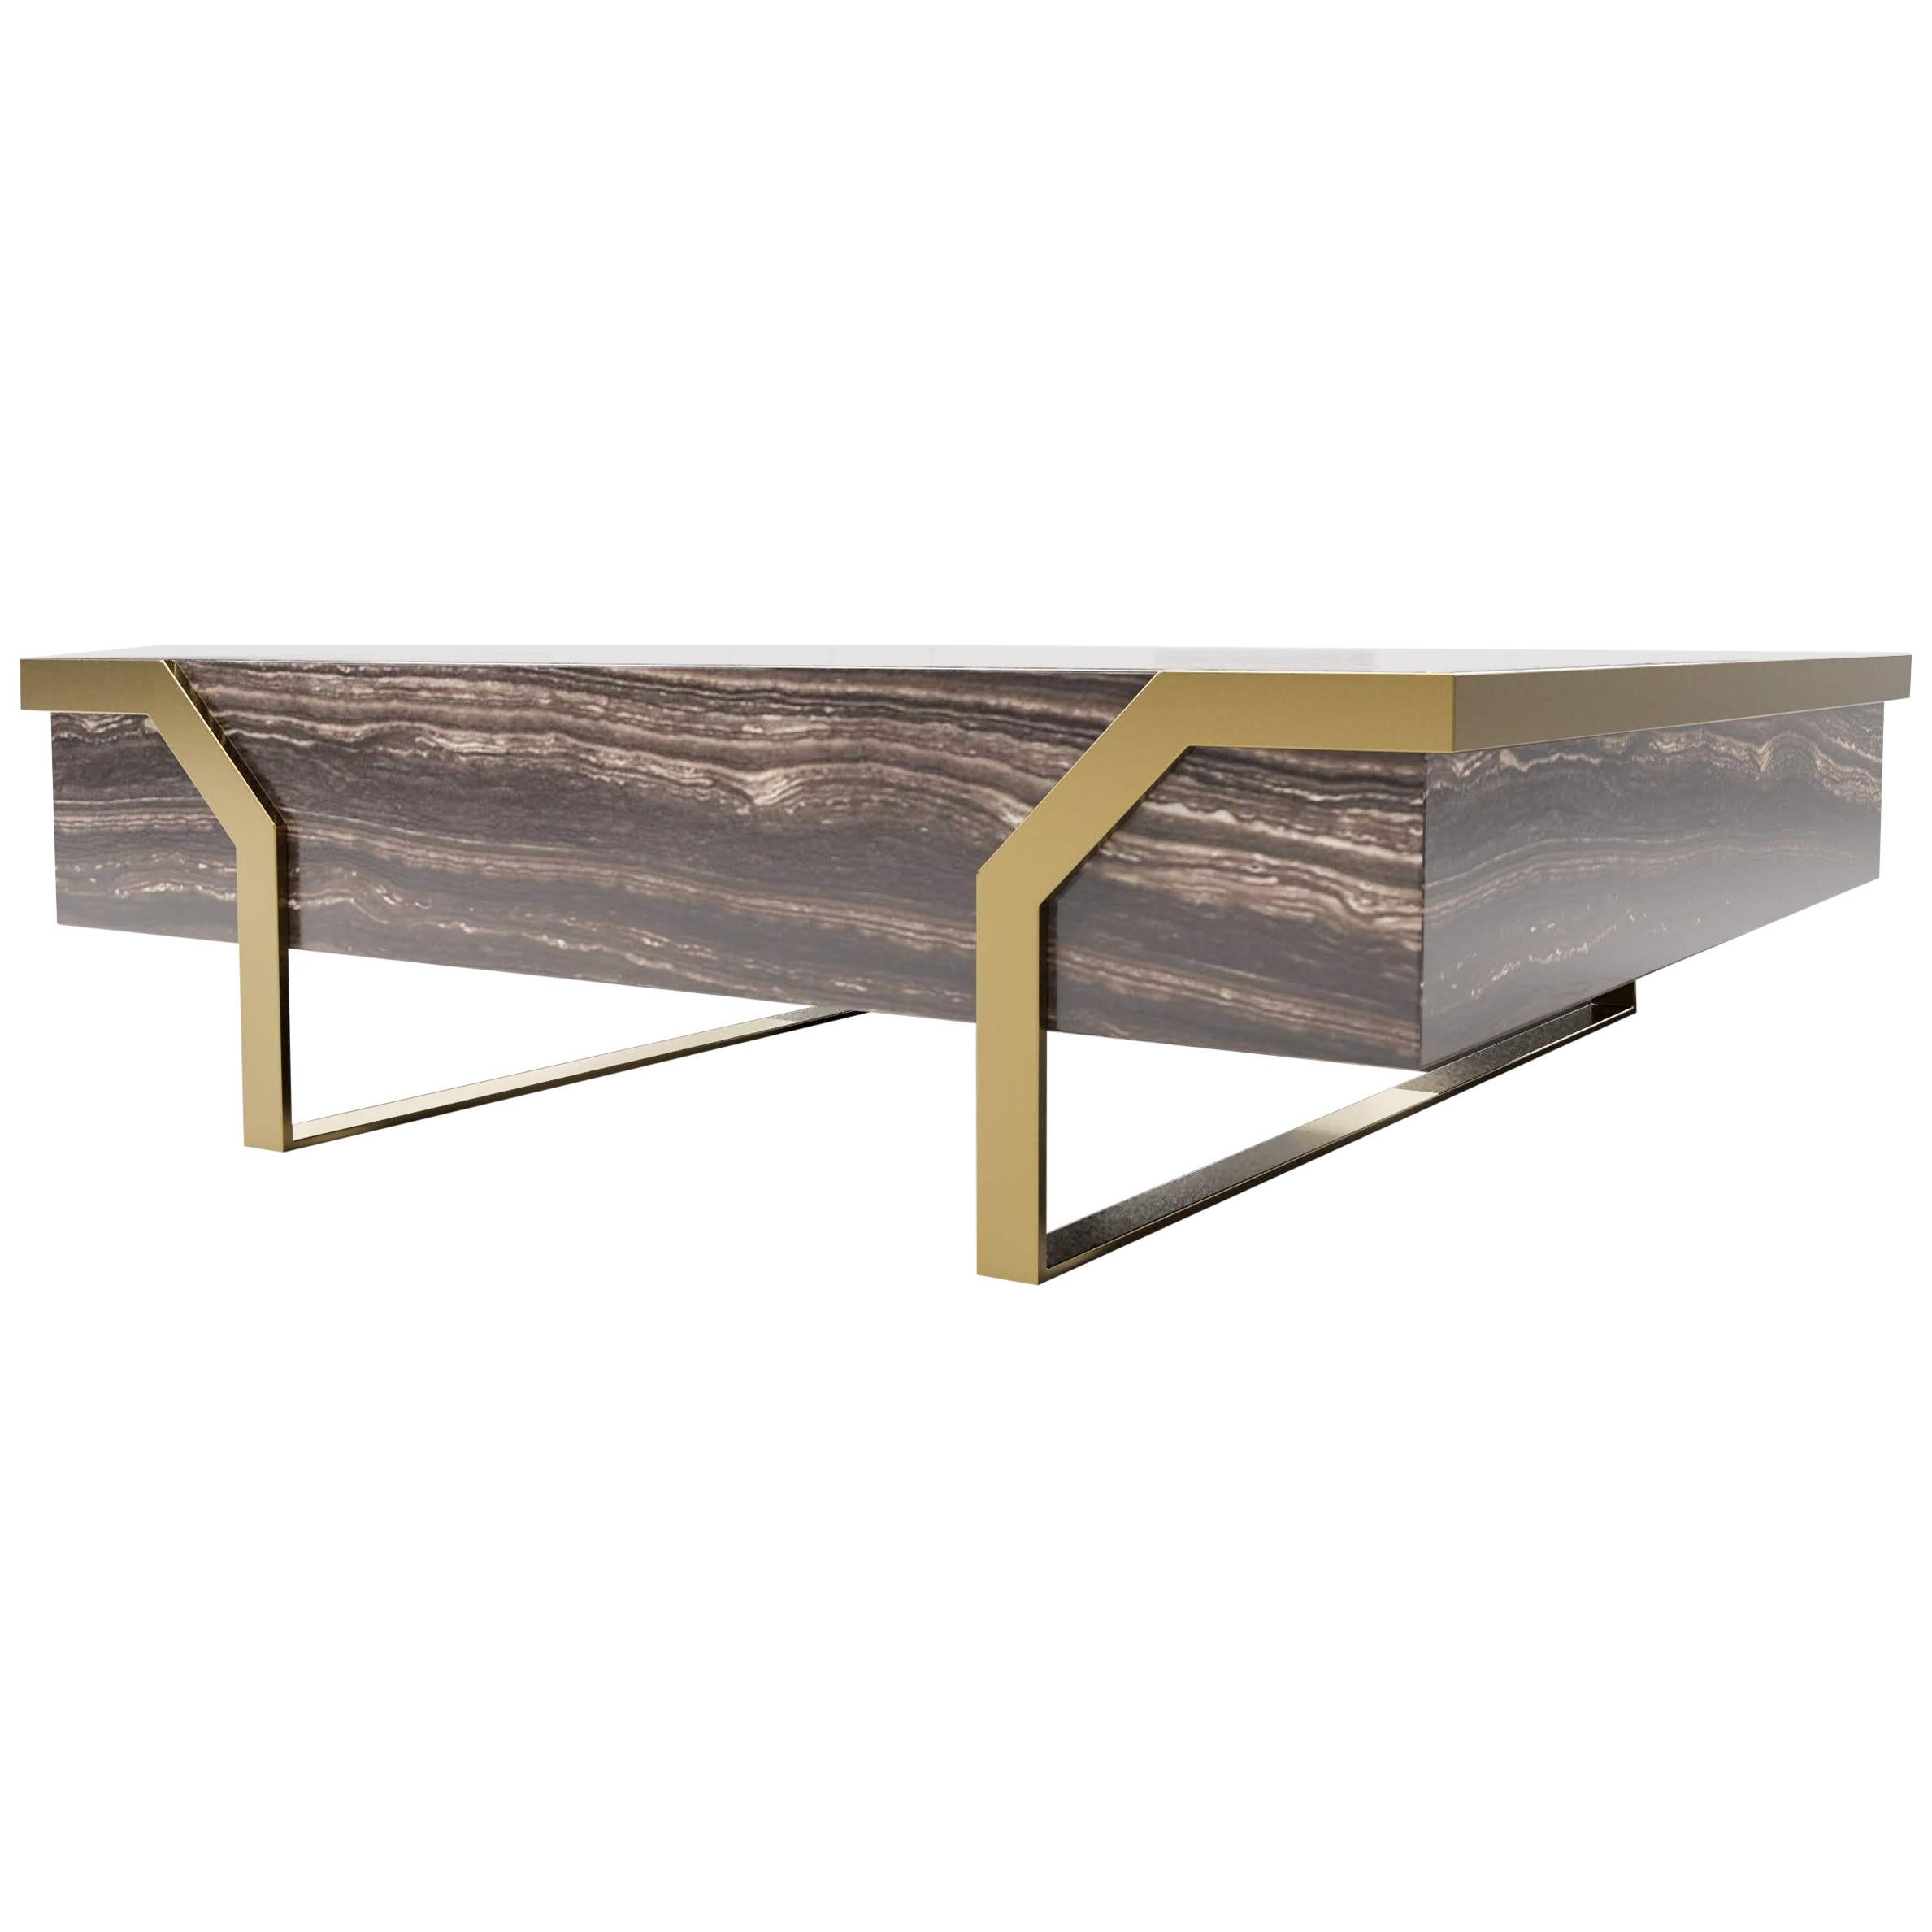 HERMOSA COFFEE TABLE - Modern Design with Tobacco Marble Body and Lacquered Legs